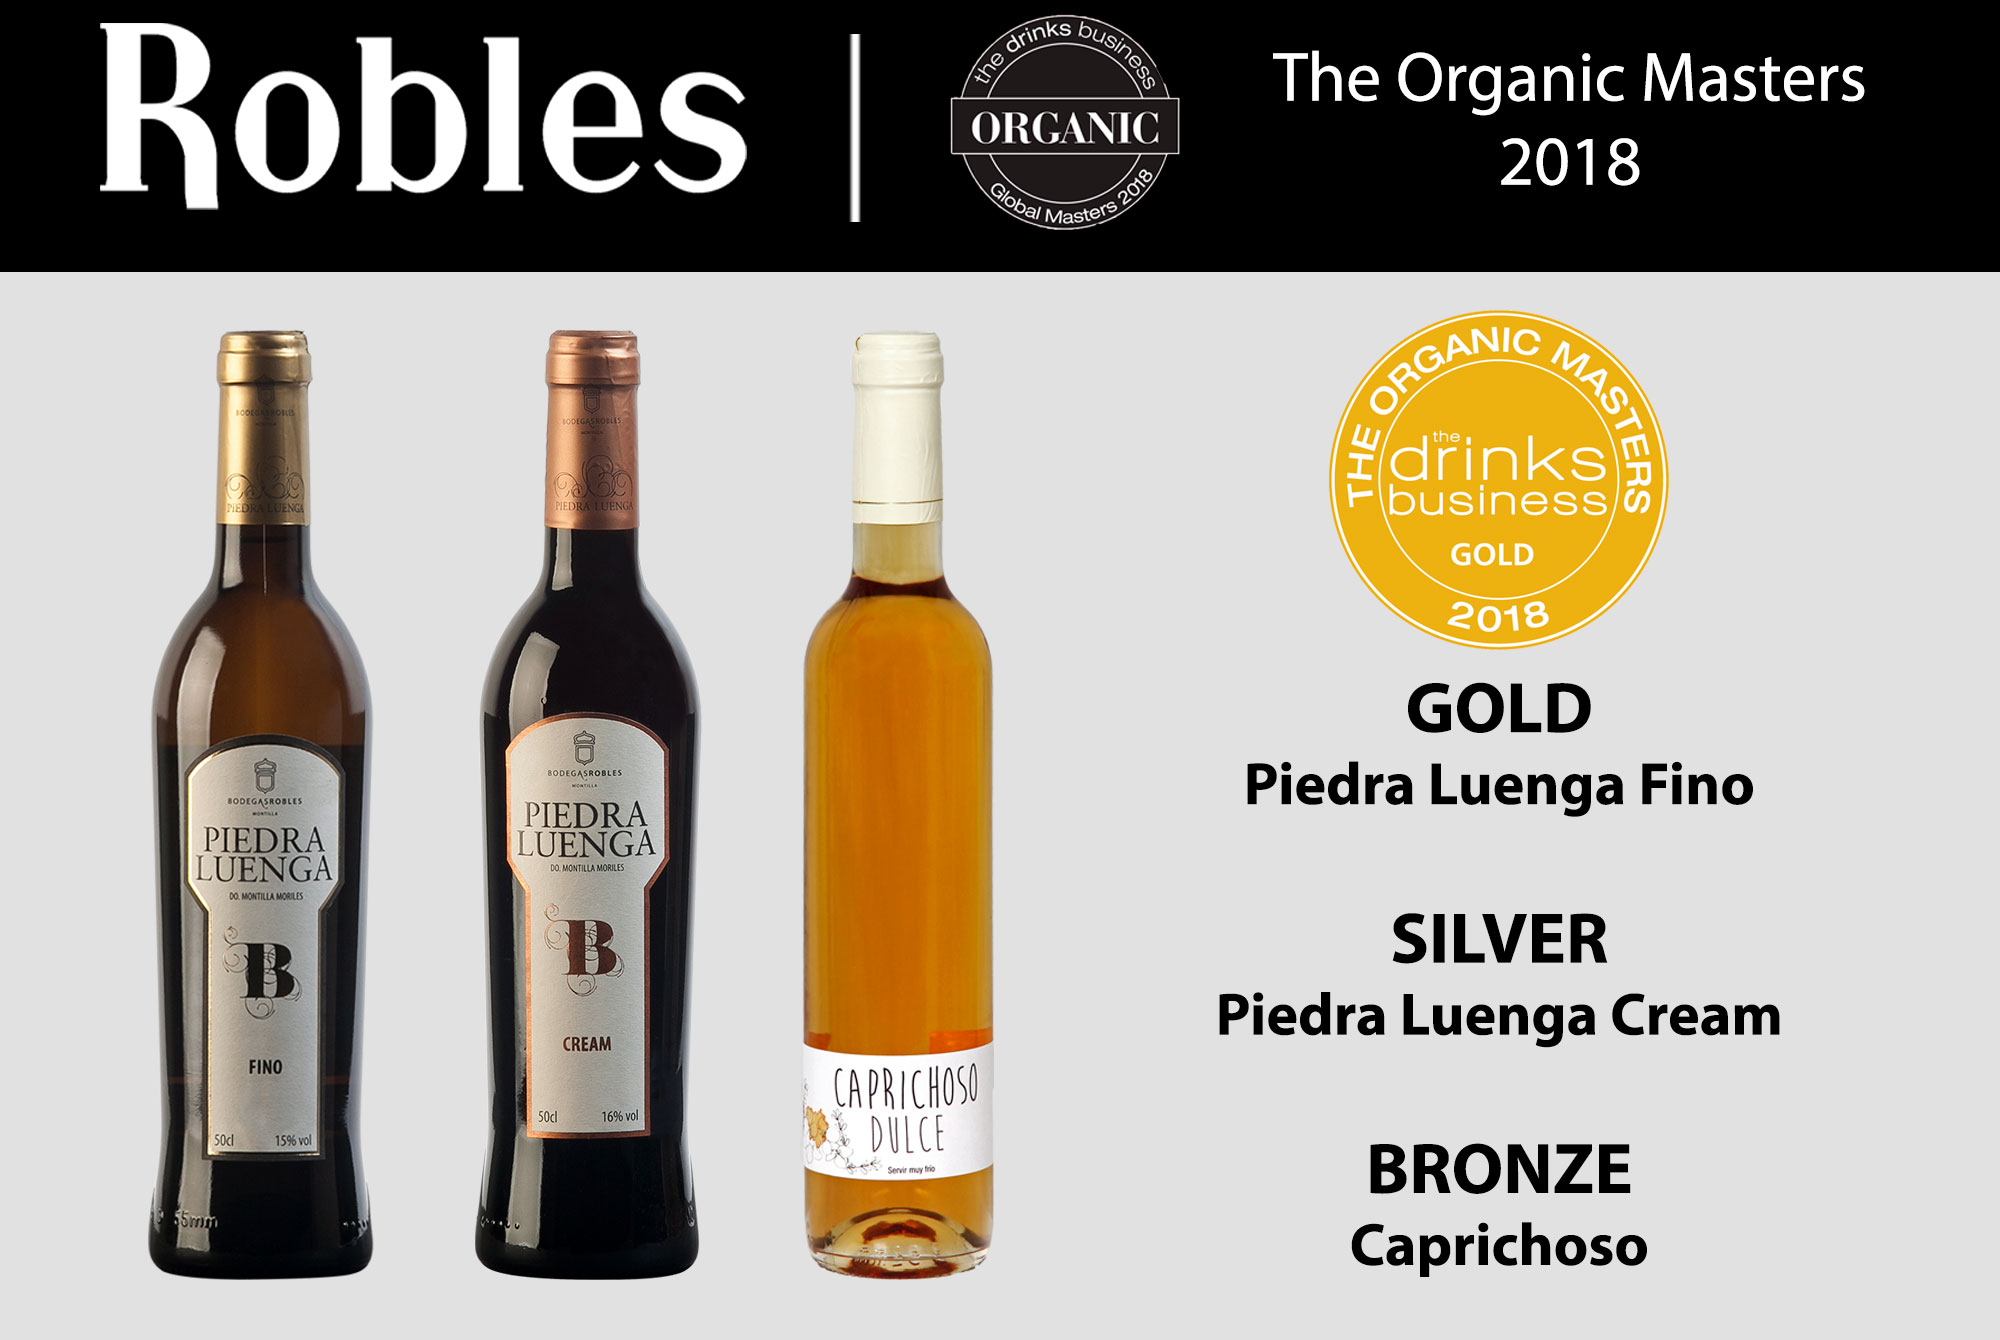 Masters of Wines recognizes the wines of Bodegas Robles: The Global Organic Masters.